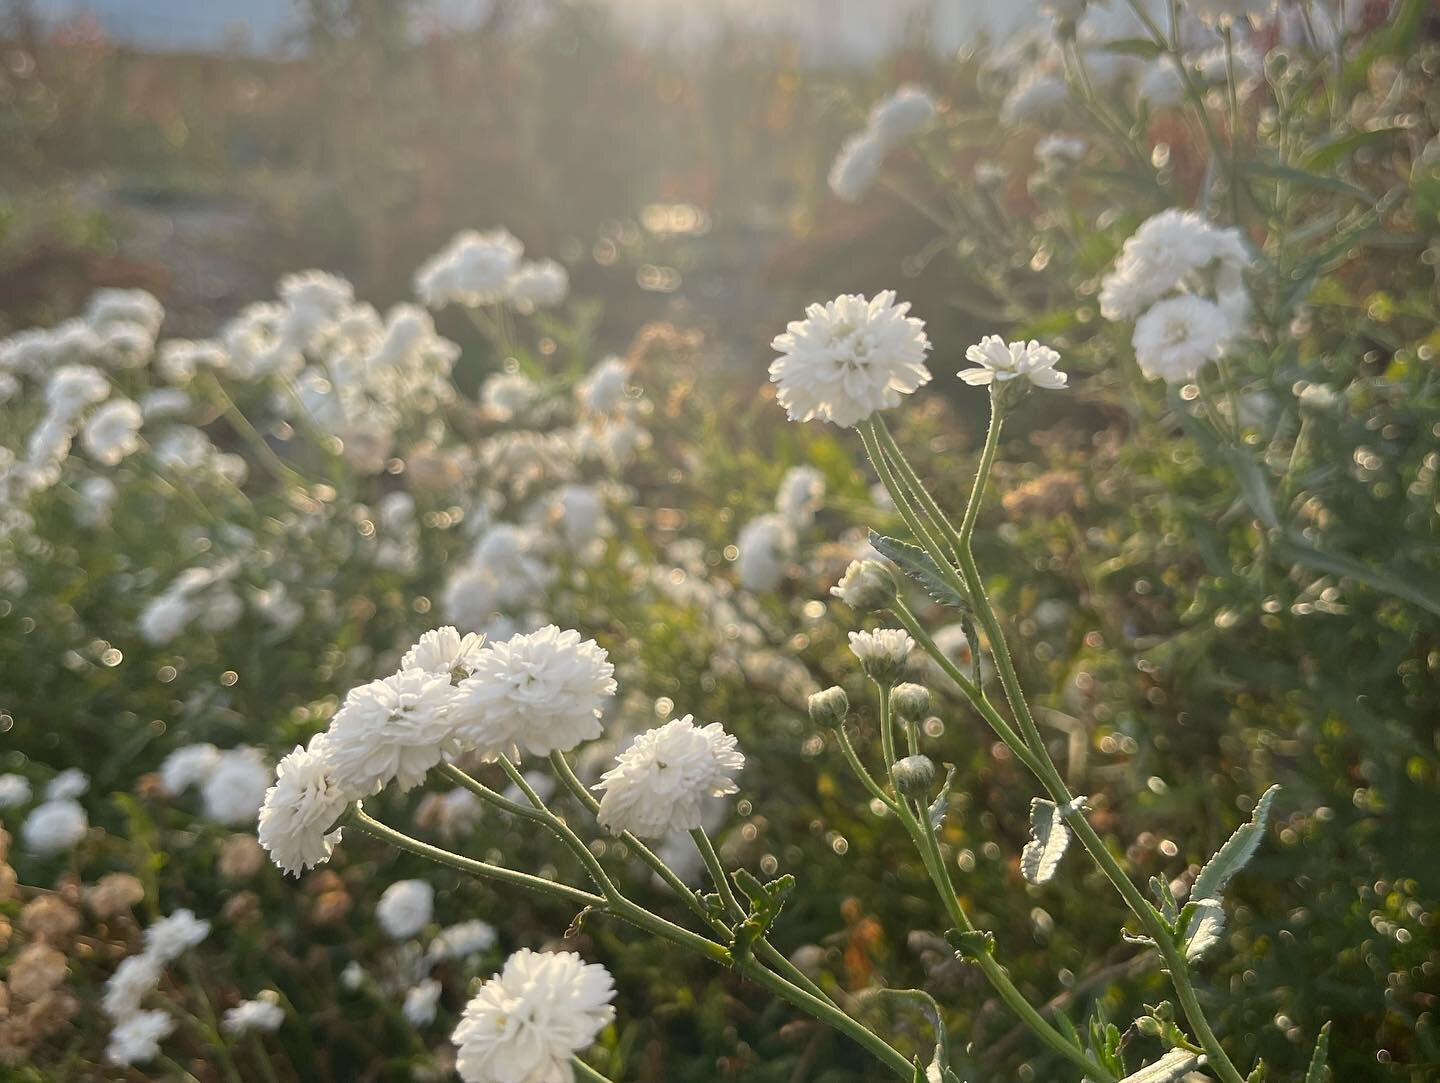 And that&rsquo;s a wrap on our growing season! Almost everything got nipped by frost except these little white yarrow, pink perennial scabiosa and one last dahlia hanging on tight.

A huge THANK YOU to everyone who supported our small business in suc